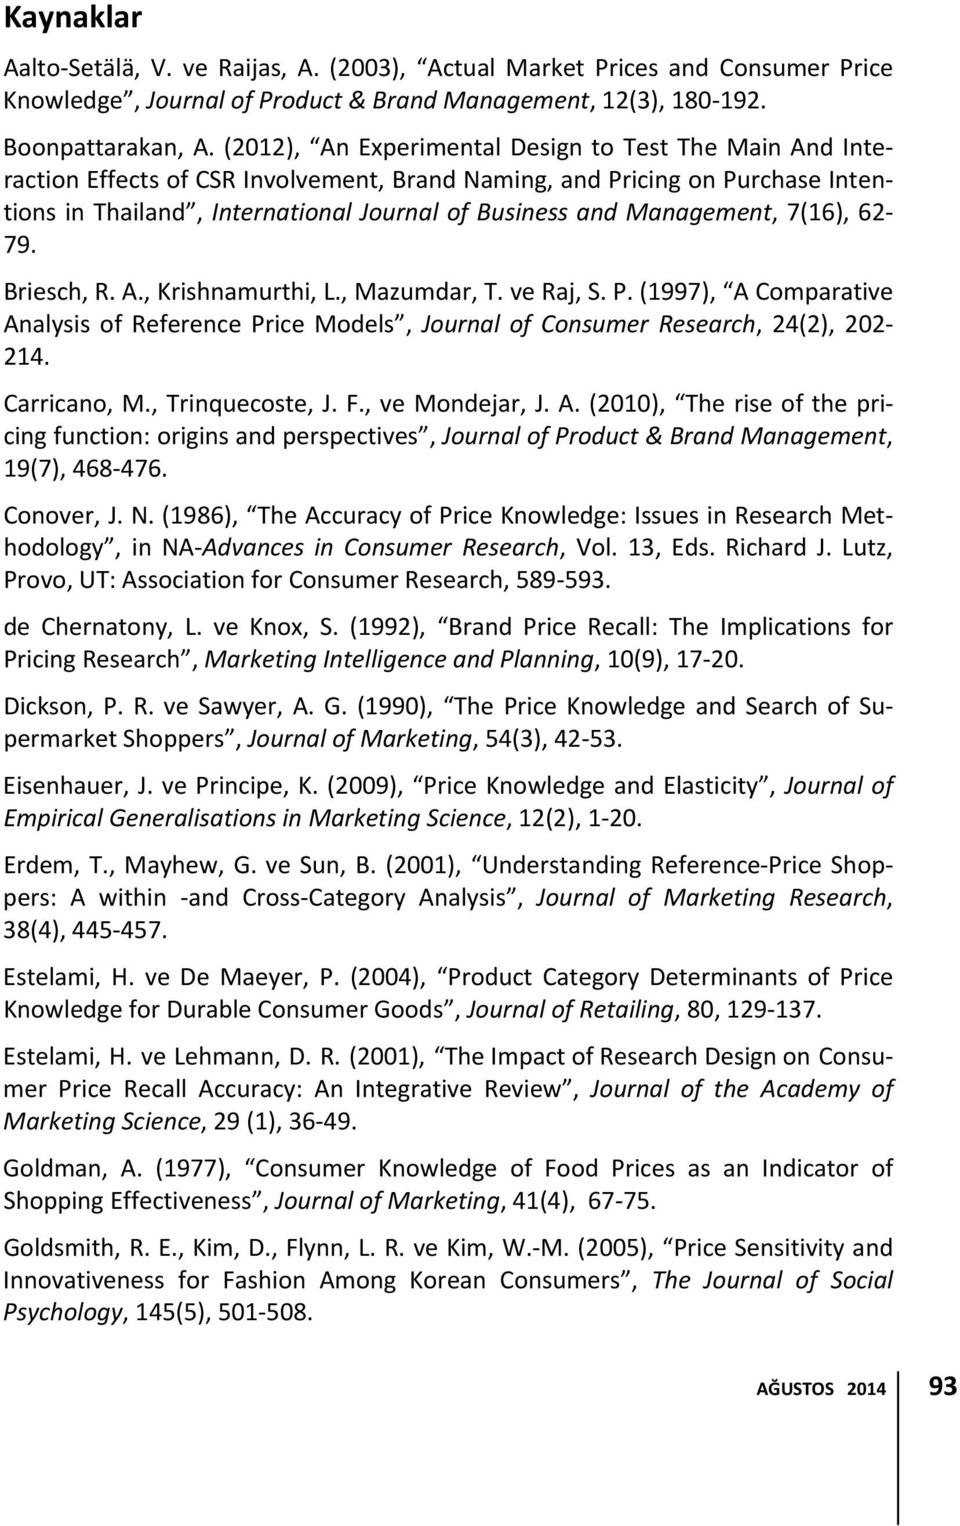 Management, 7(16), 62 79. Briesch, R. A., Krishnamurthi, L., Mazumdar, T. ve Raj, S. P. (1997), A Comparative Analysis of Reference Price Models, Journal of Consumer Research, 24(2), 202 214.